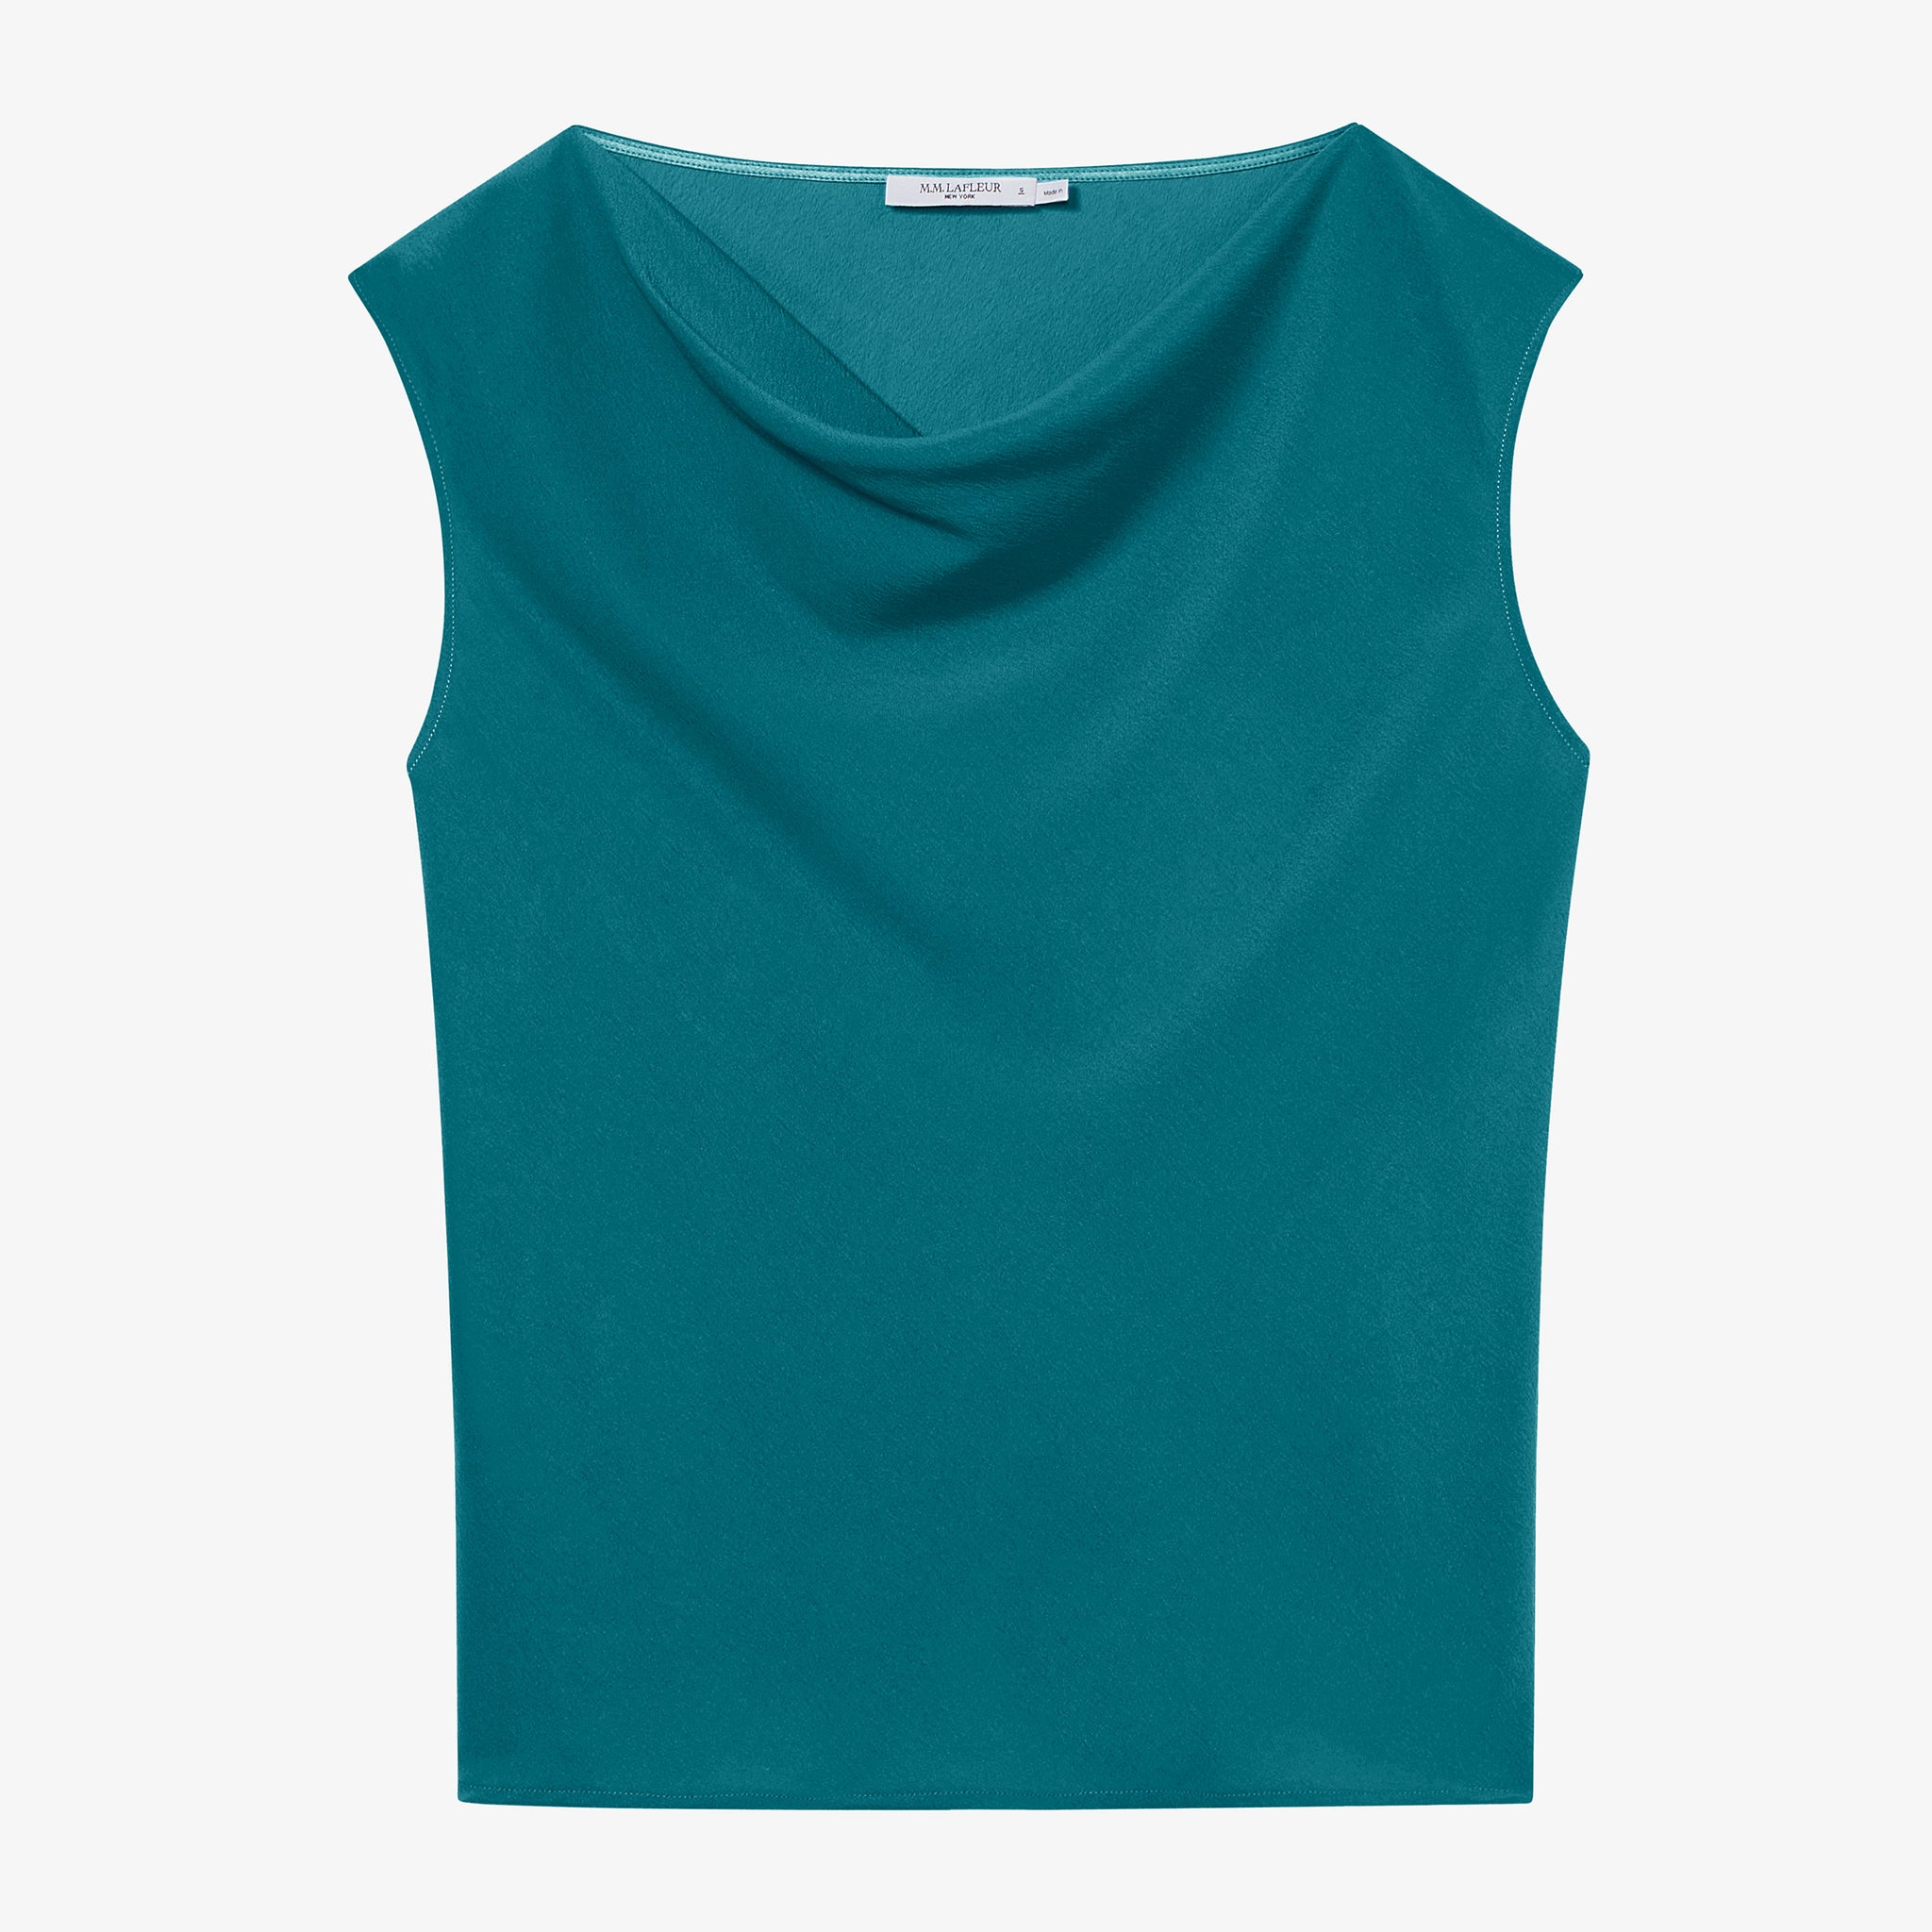 packshot image of the nora top in mineral blue